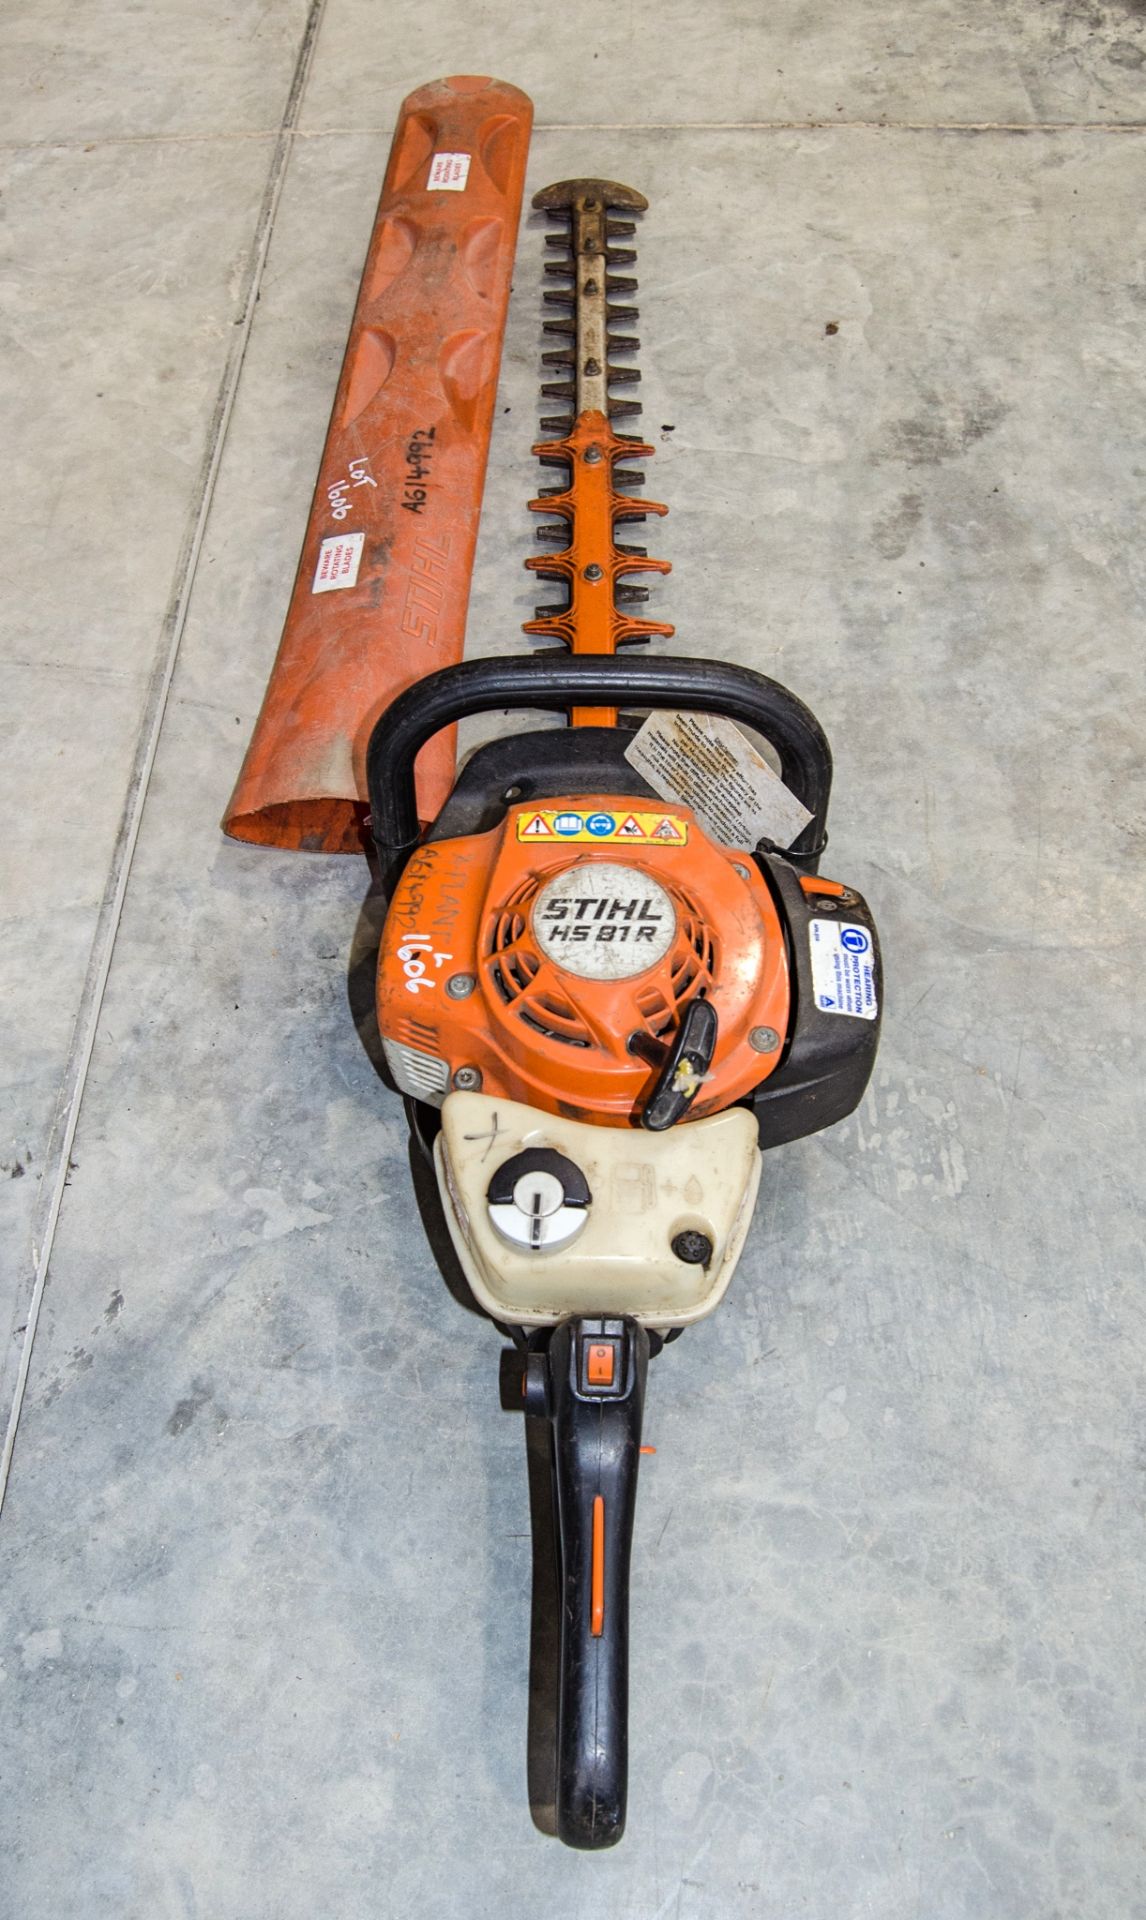 Stihl HS81 R petrol driven hedge cutter A614992 - Image 2 of 2